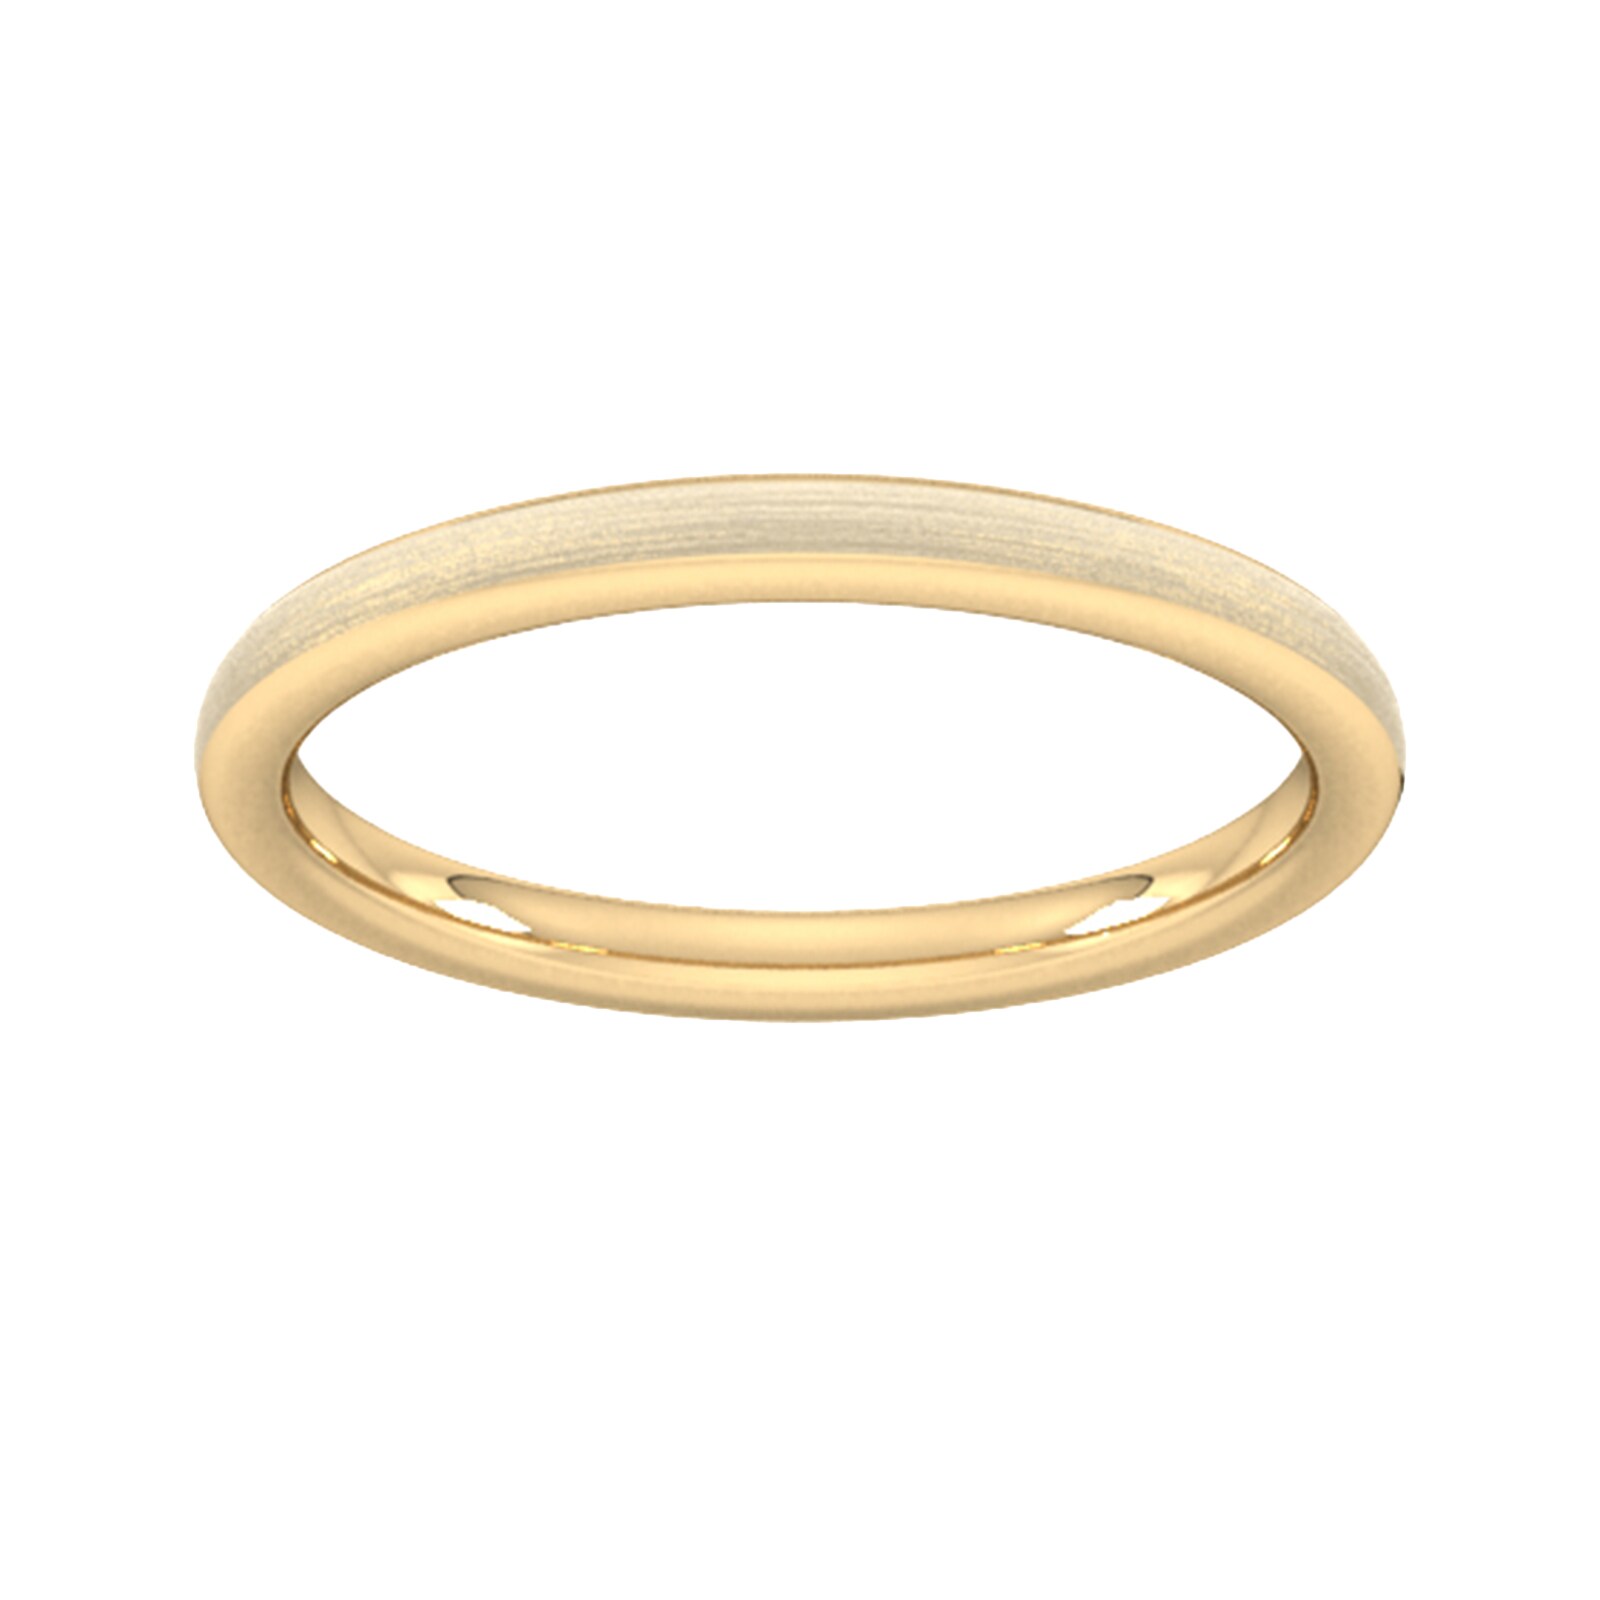 2mm D Shape Heavy Matt Finished Wedding Ring In 18 Carat Yellow Gold - Ring Size P